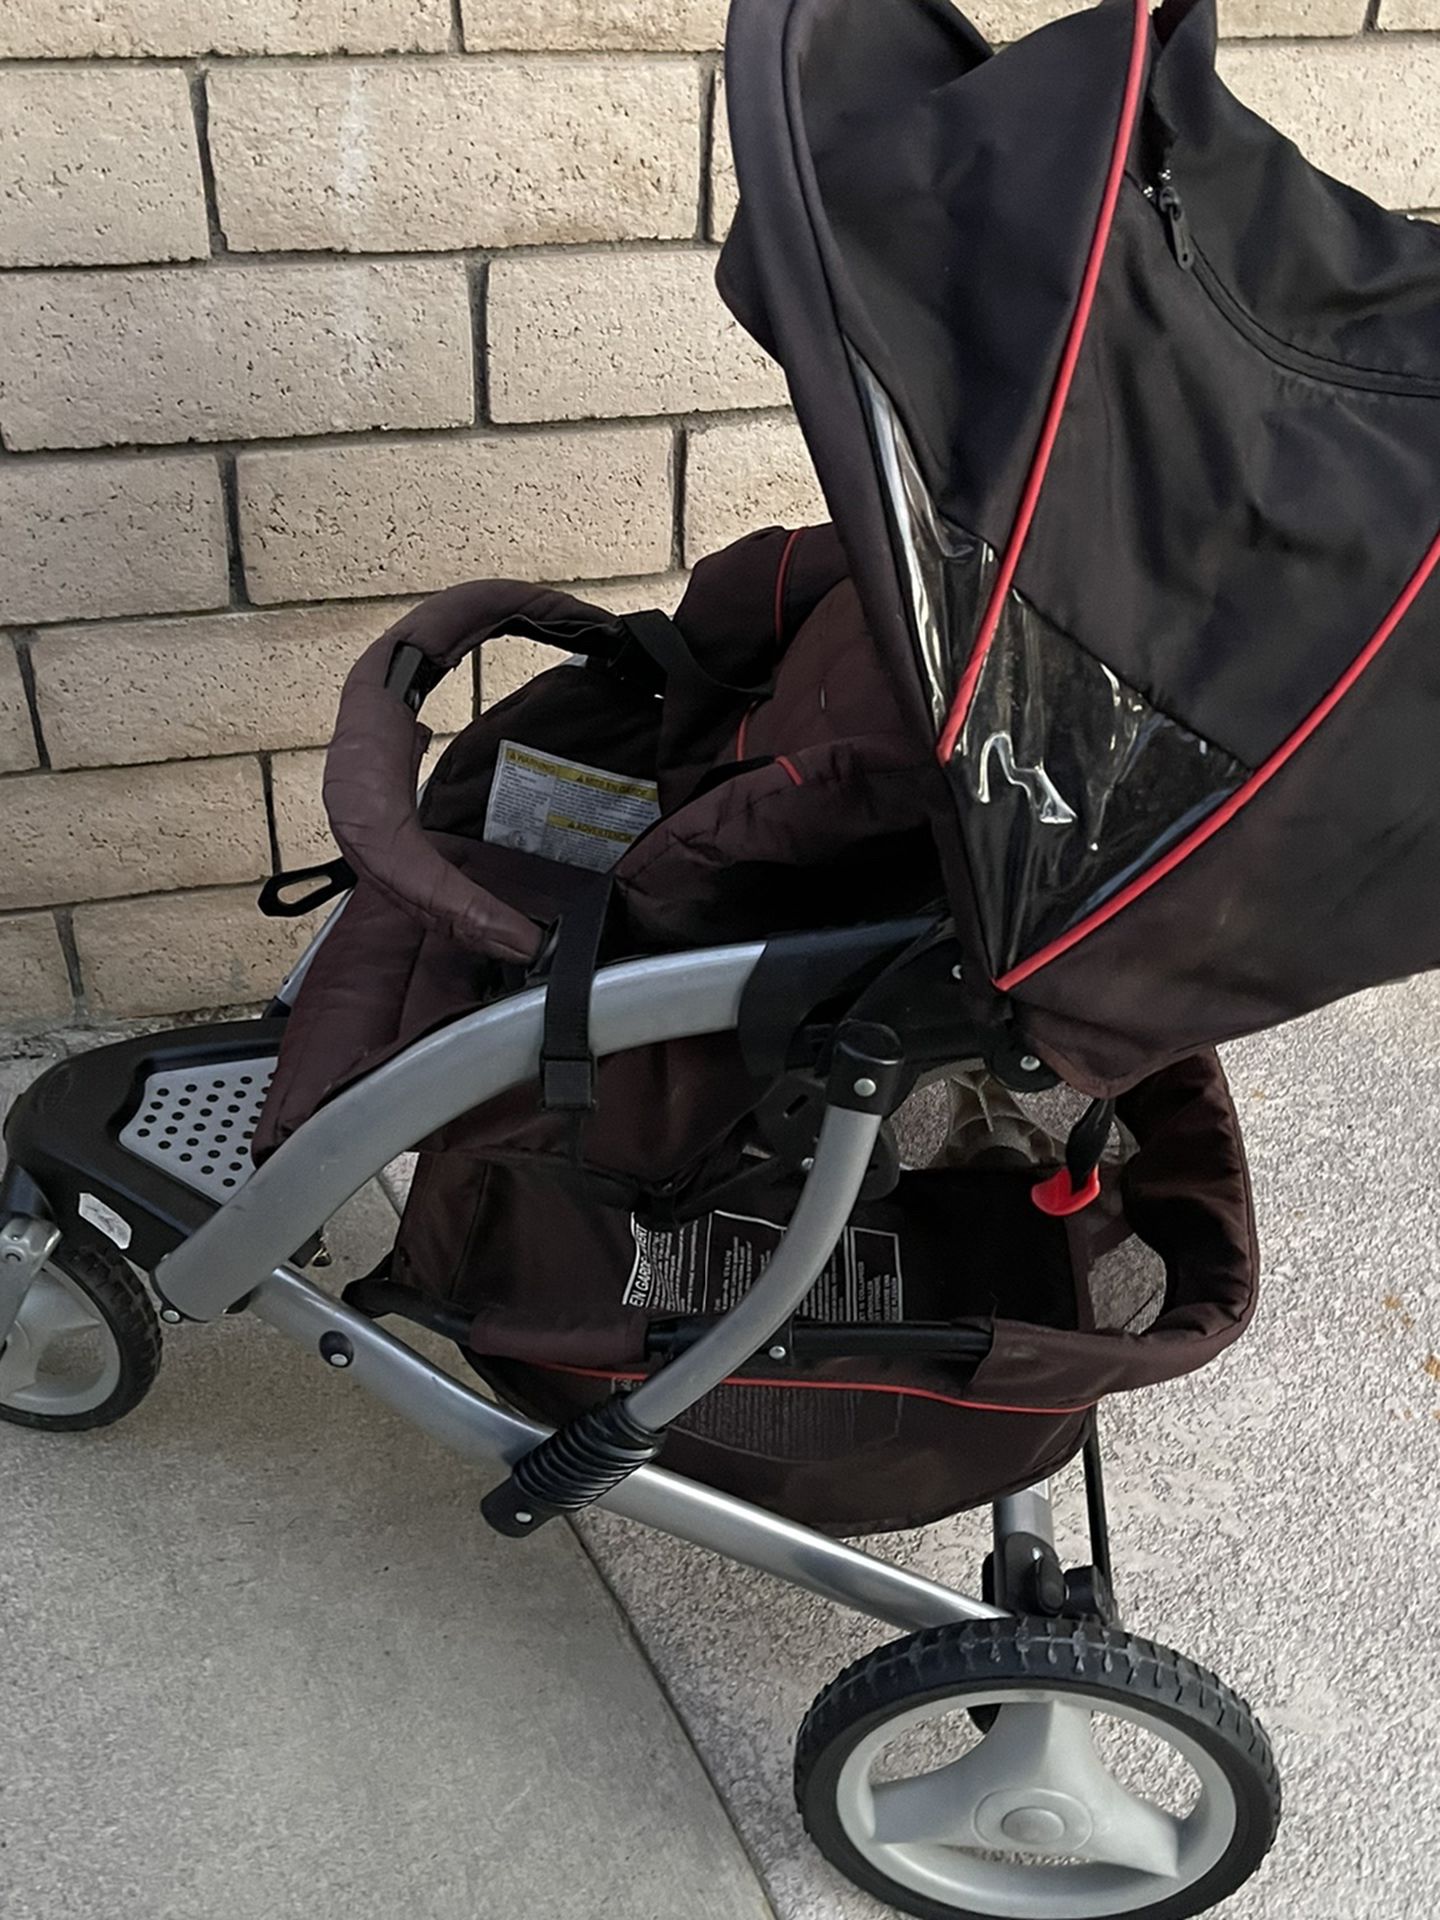 Graco Stroller With Front Wheel Lock And Swivel Function